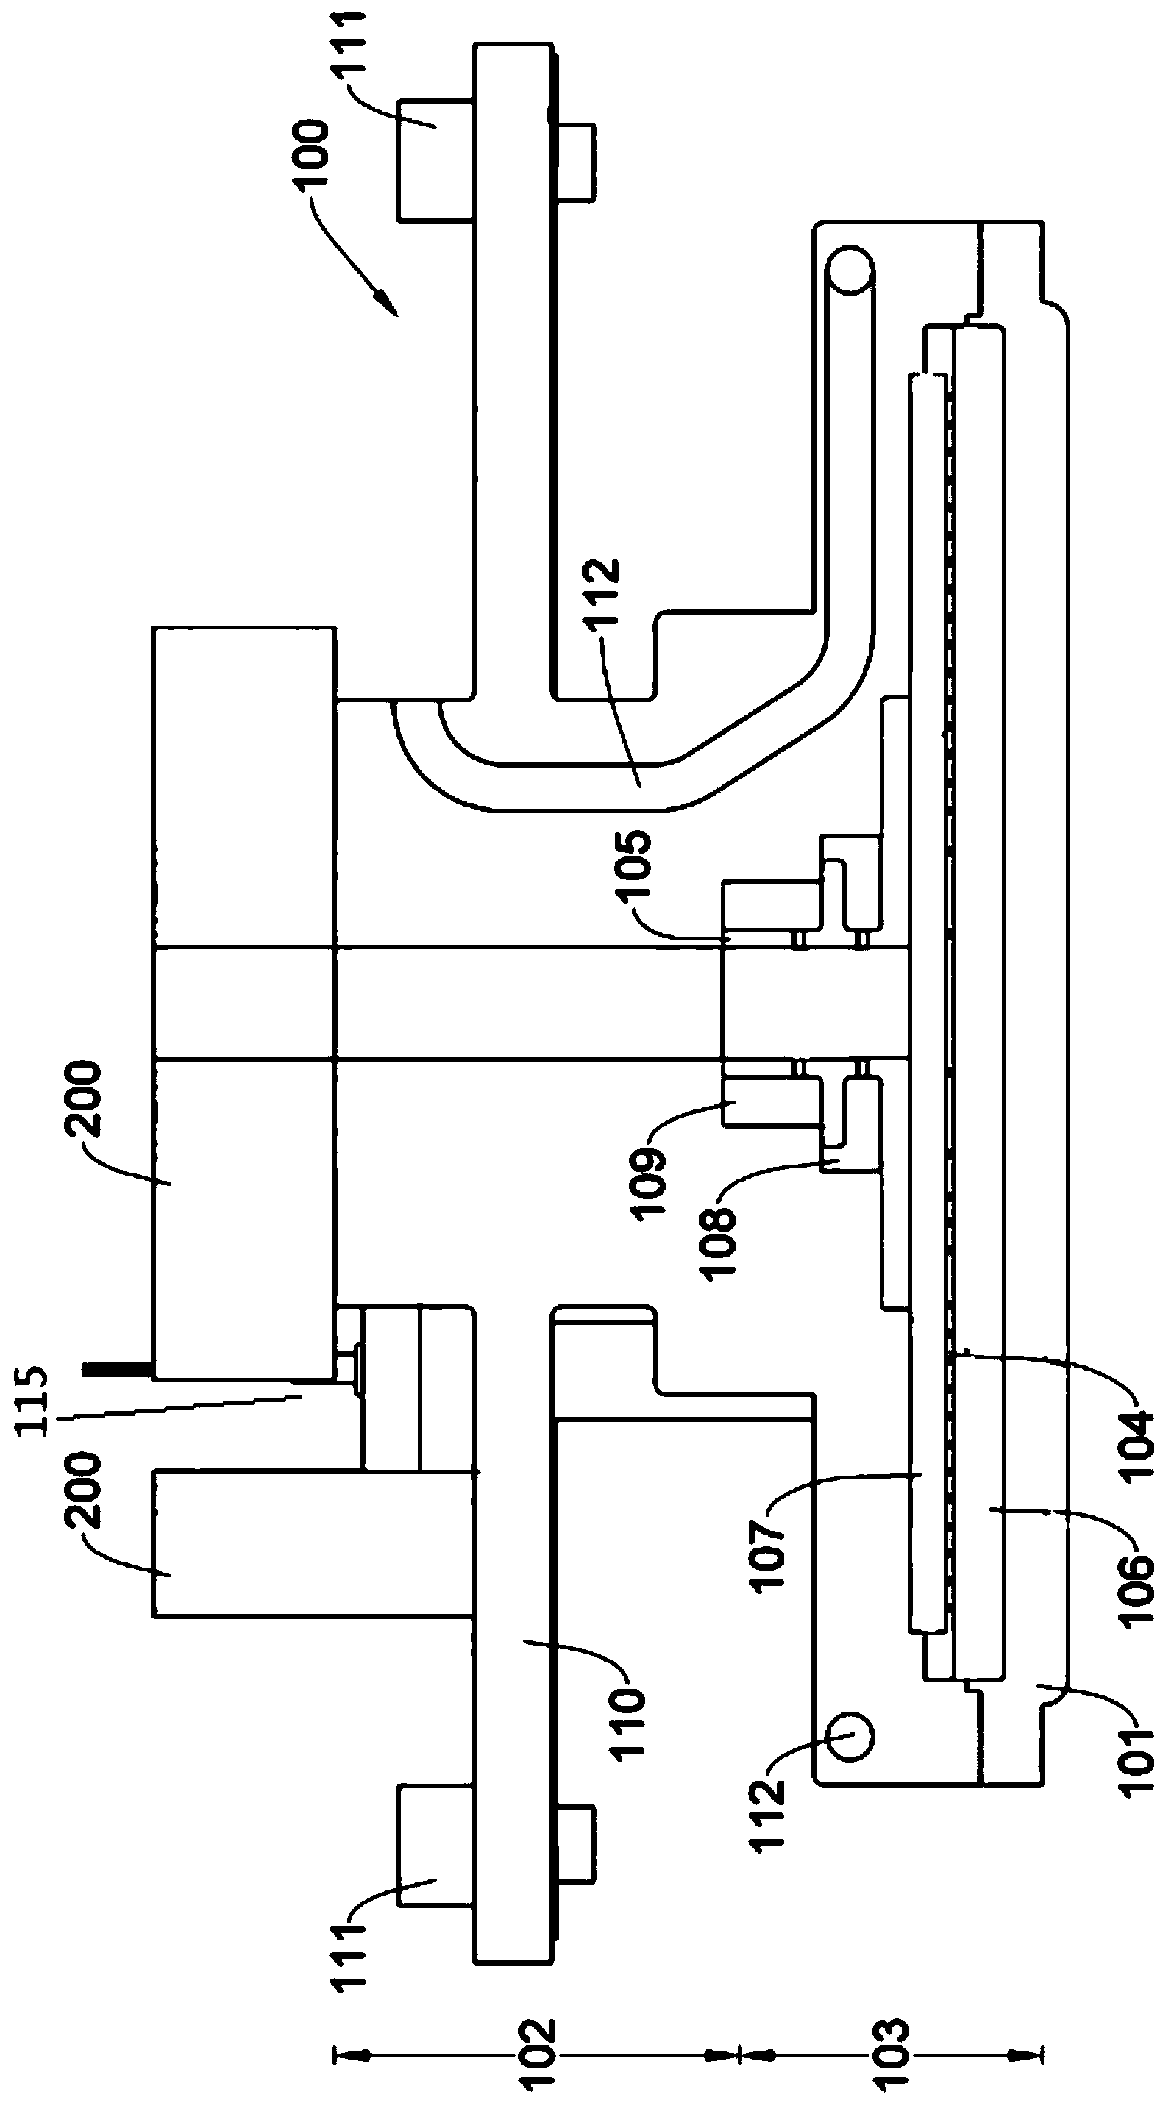 Heating device and temperature controlled spray assembly